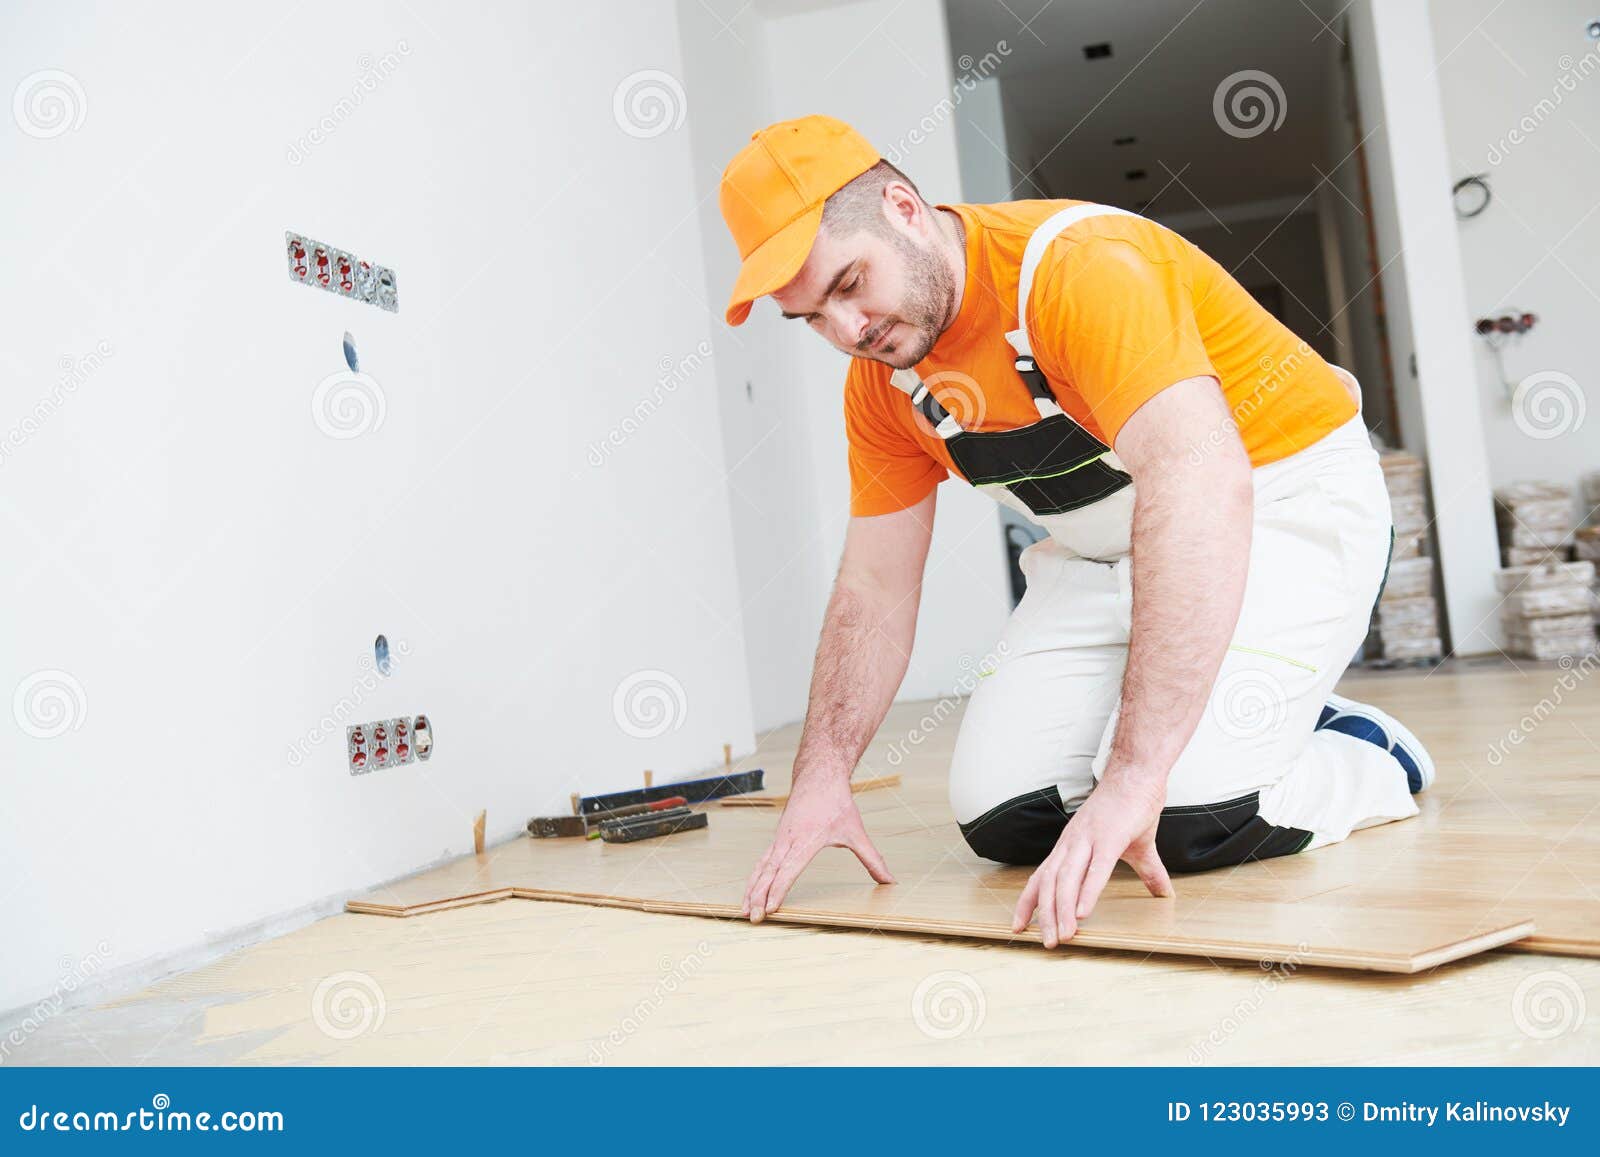 Worker Joining Parquet Floor Stock Image Image Of Construction